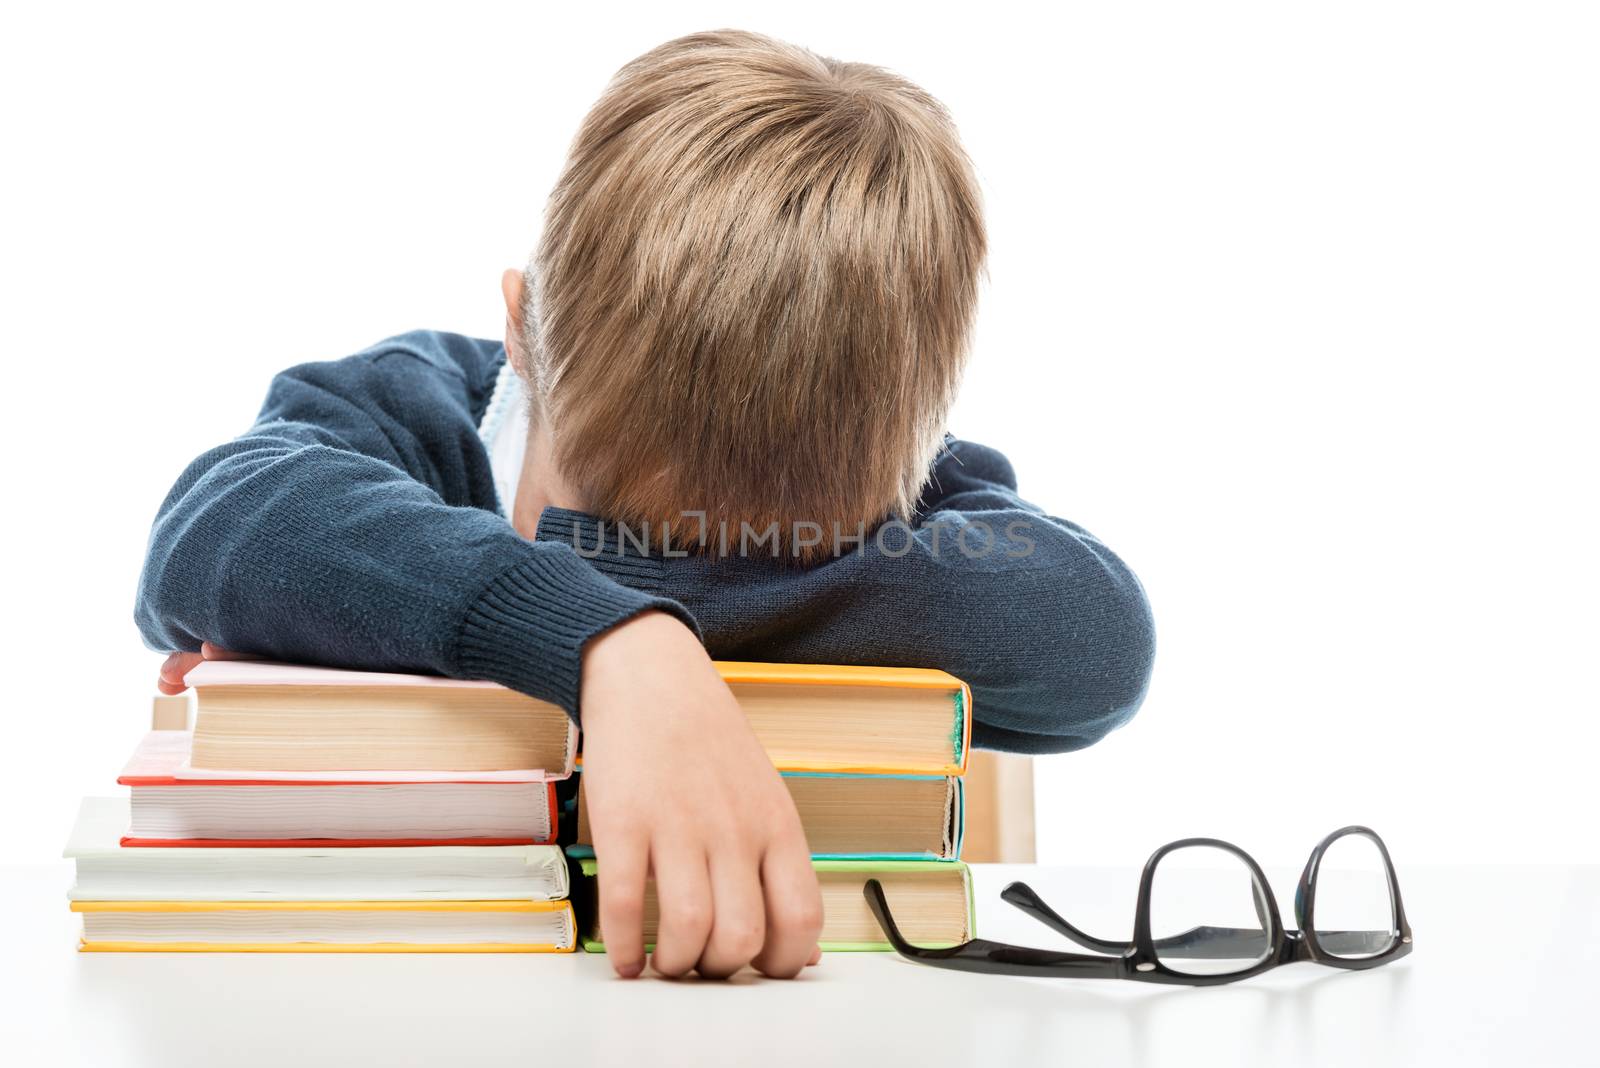 the schoolboy fell asleep on the books during the lesson at the by kosmsos111